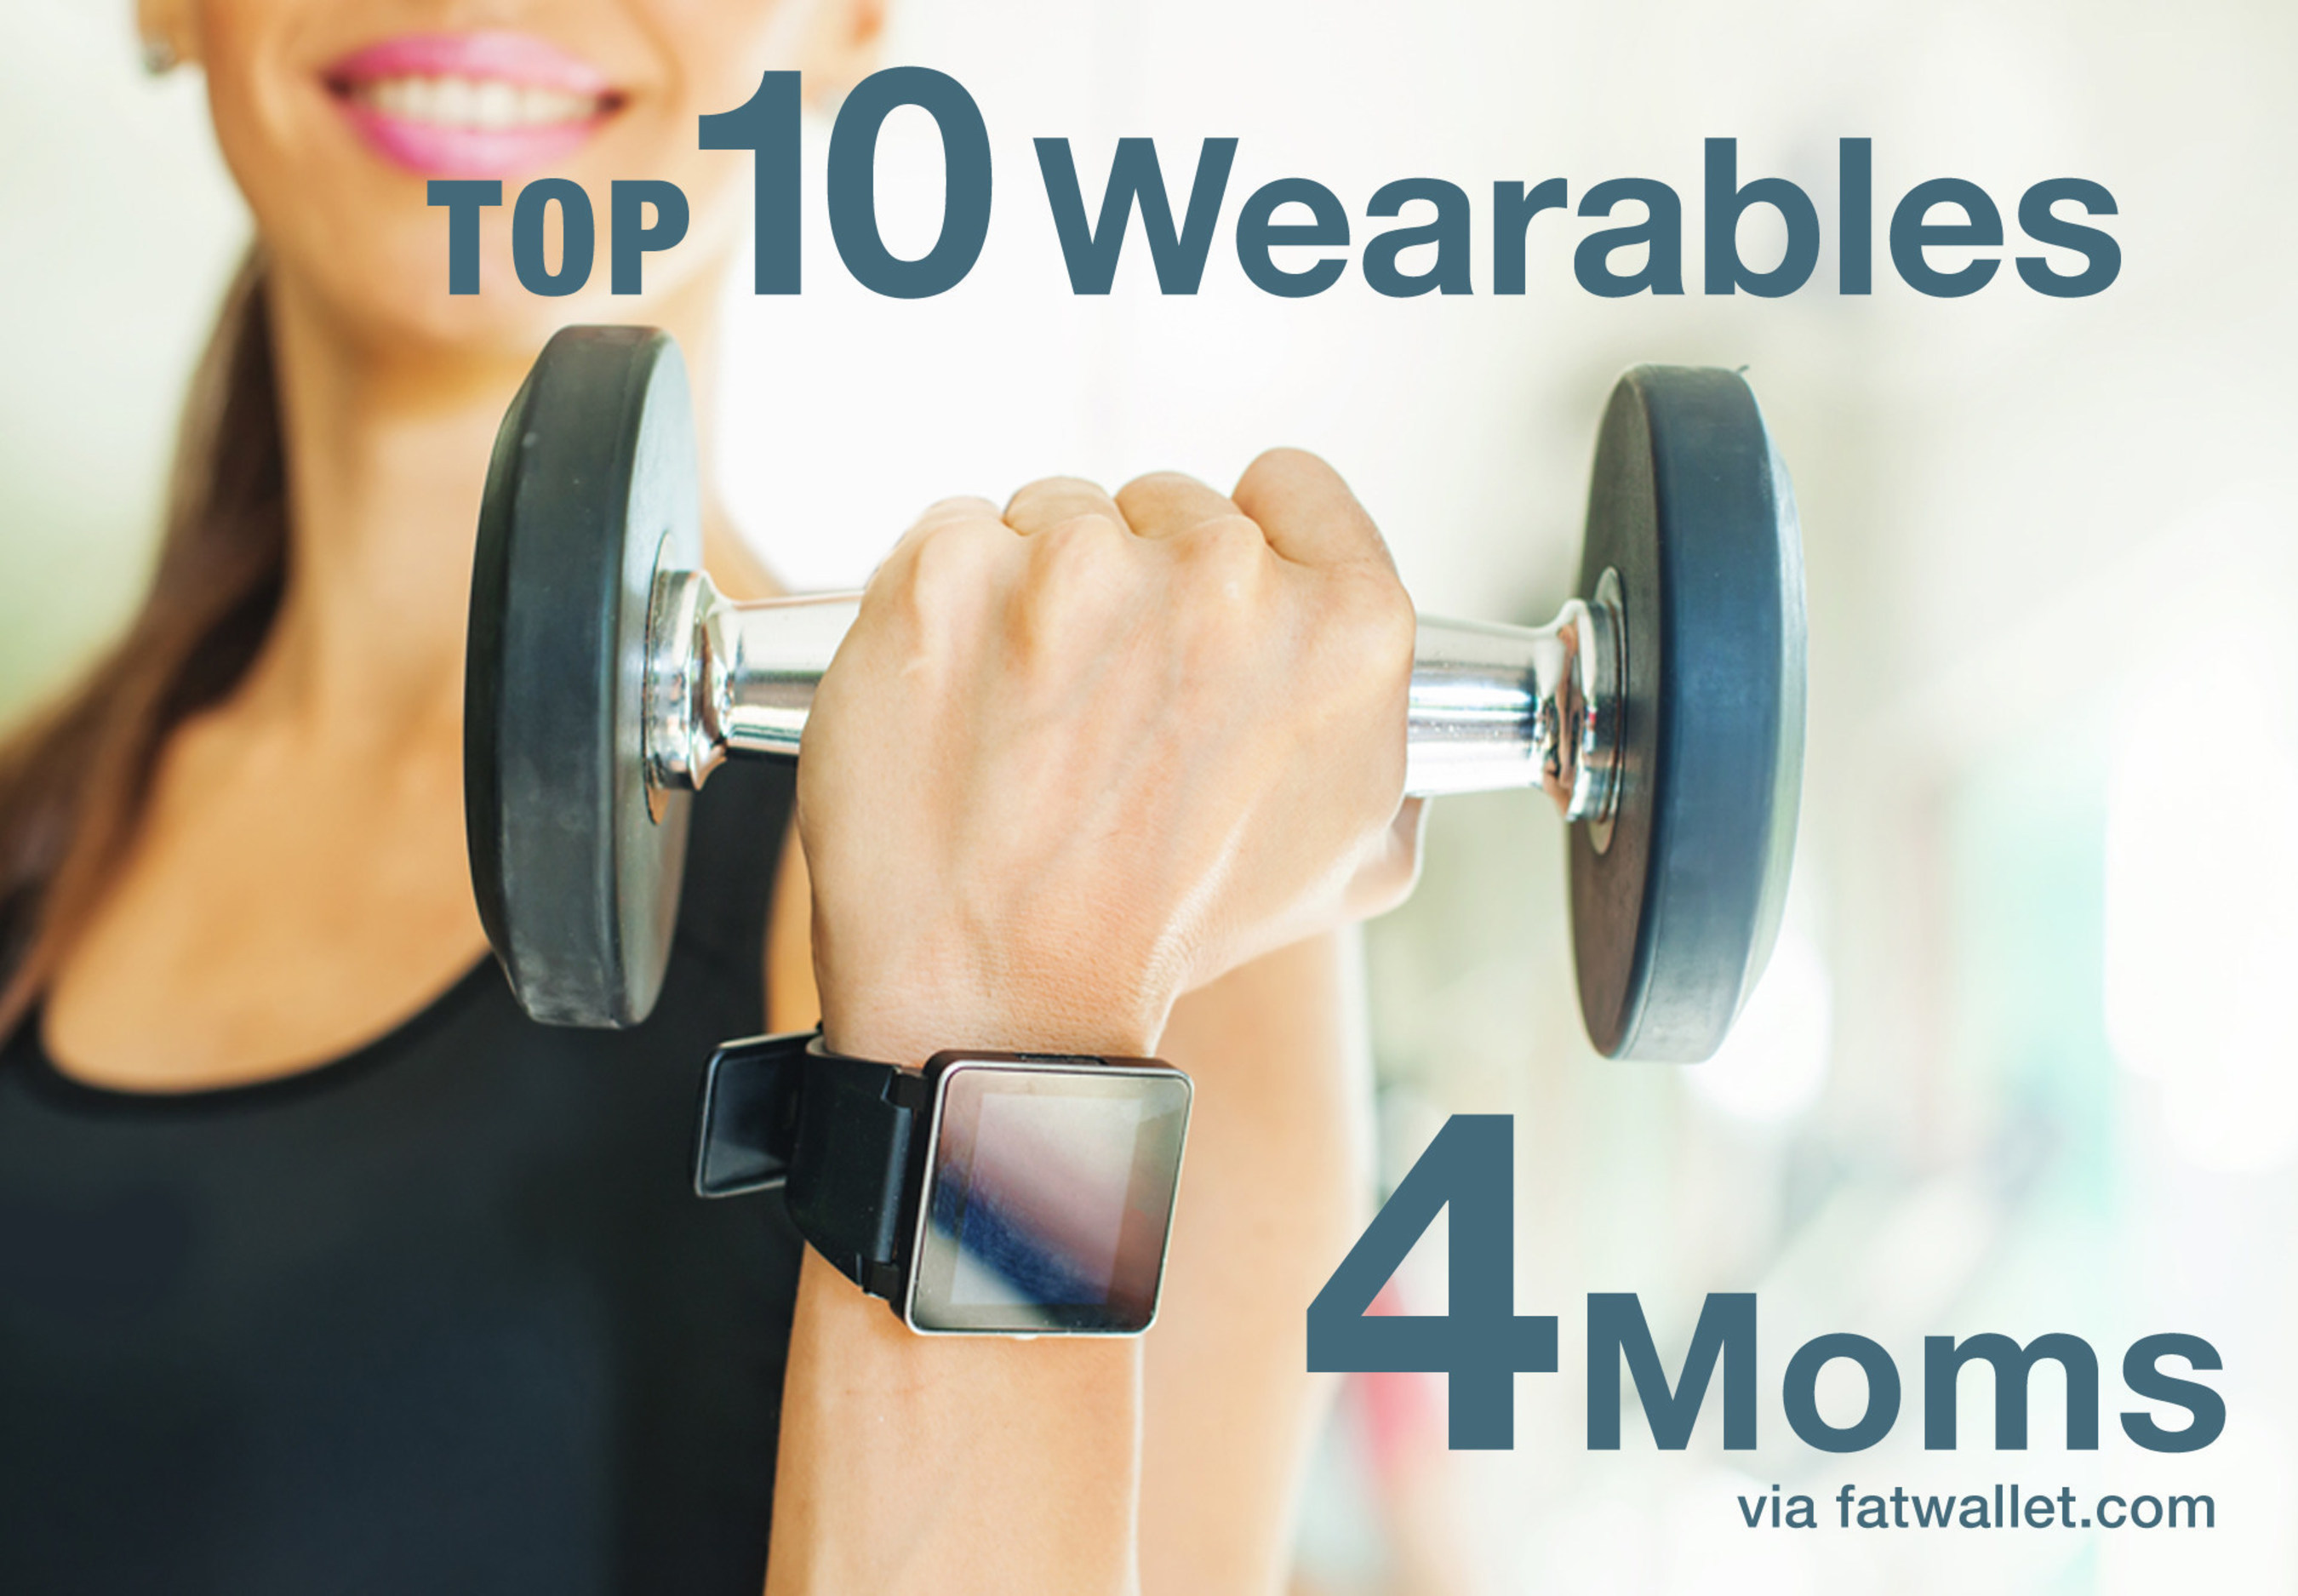 Mother's Day Spending Up as Online Shoppers Seek Holiday Discounts: FatWallet offers guide to the 10 best-selling wearables trending as the top gifts for moms in 2016.